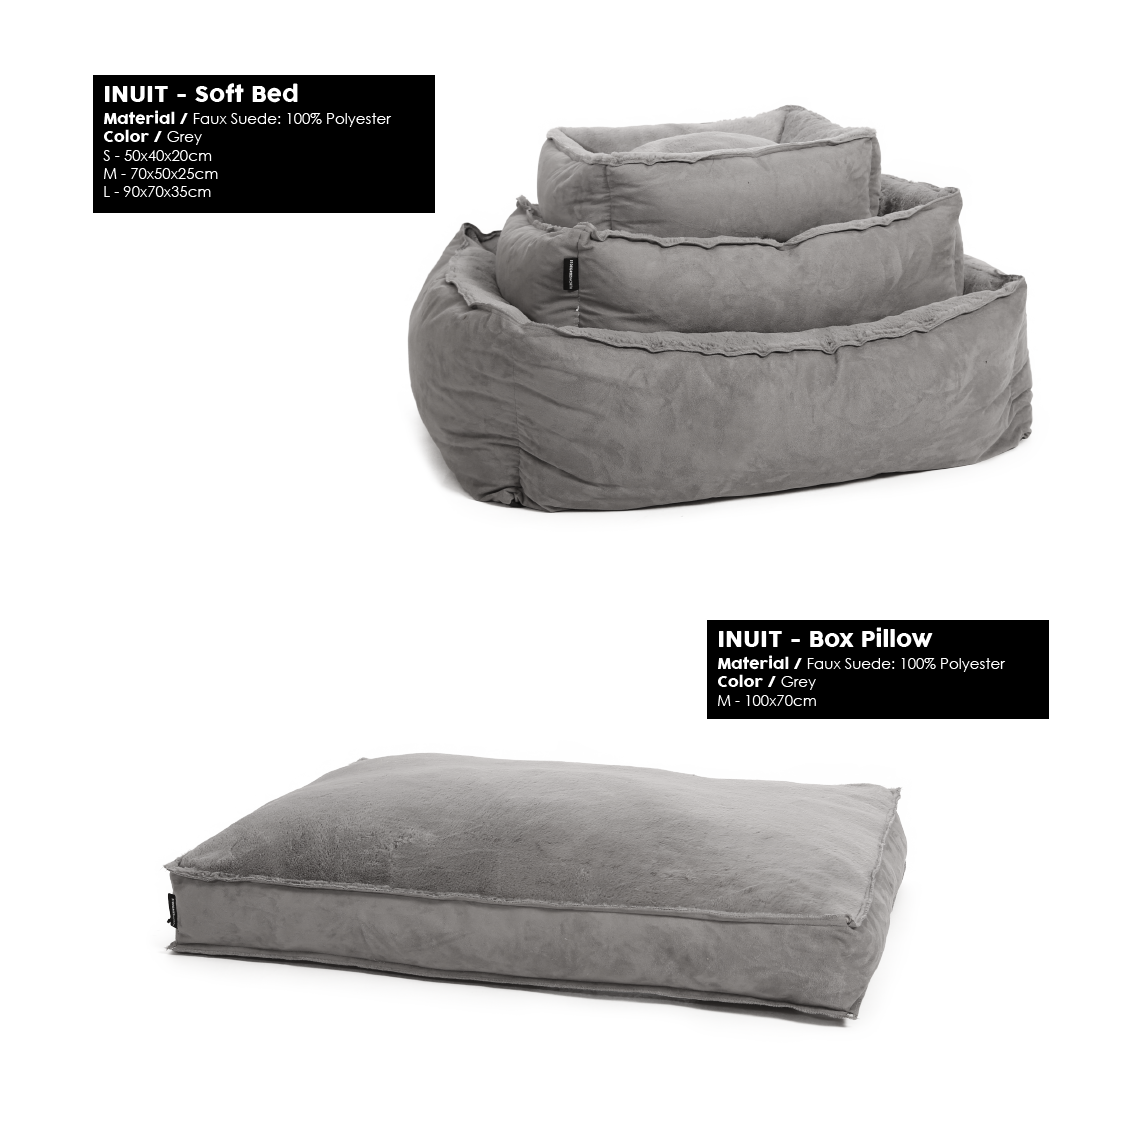 51 Degrees North Inuit Grey Softbed Boxpillow